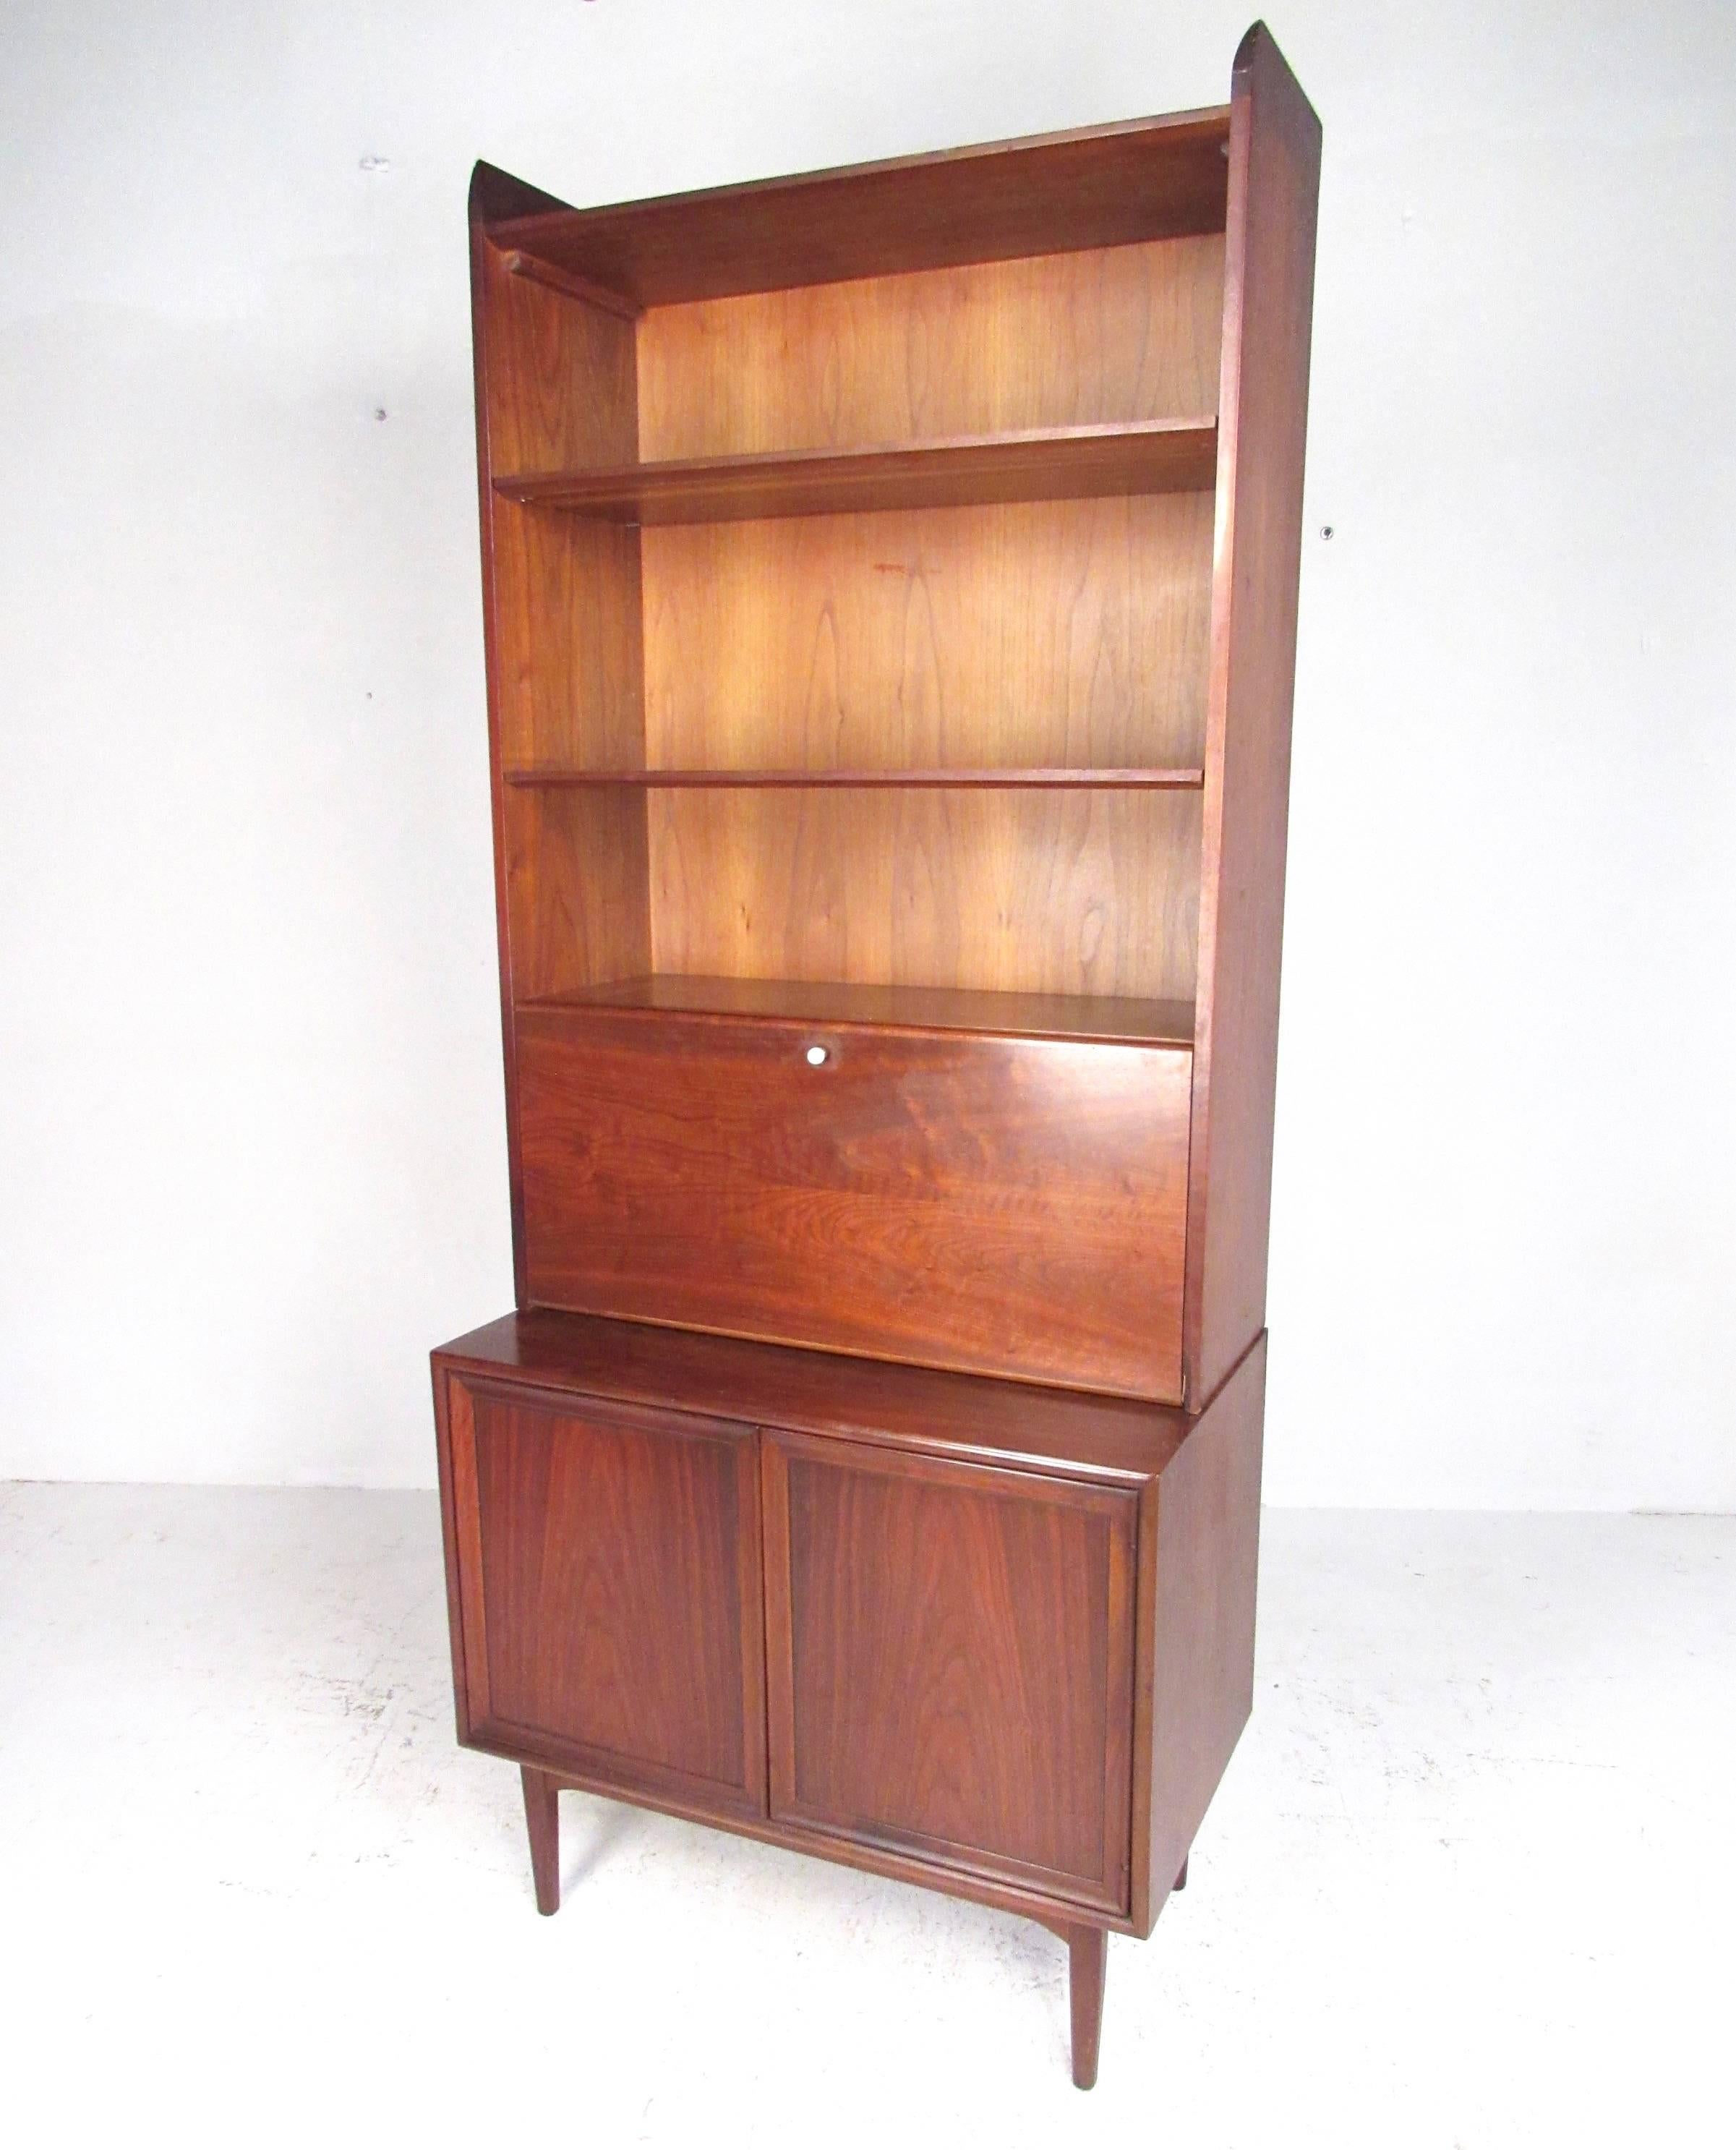 This stylish tall bookcase by Kipp Stewart for the Drexel 